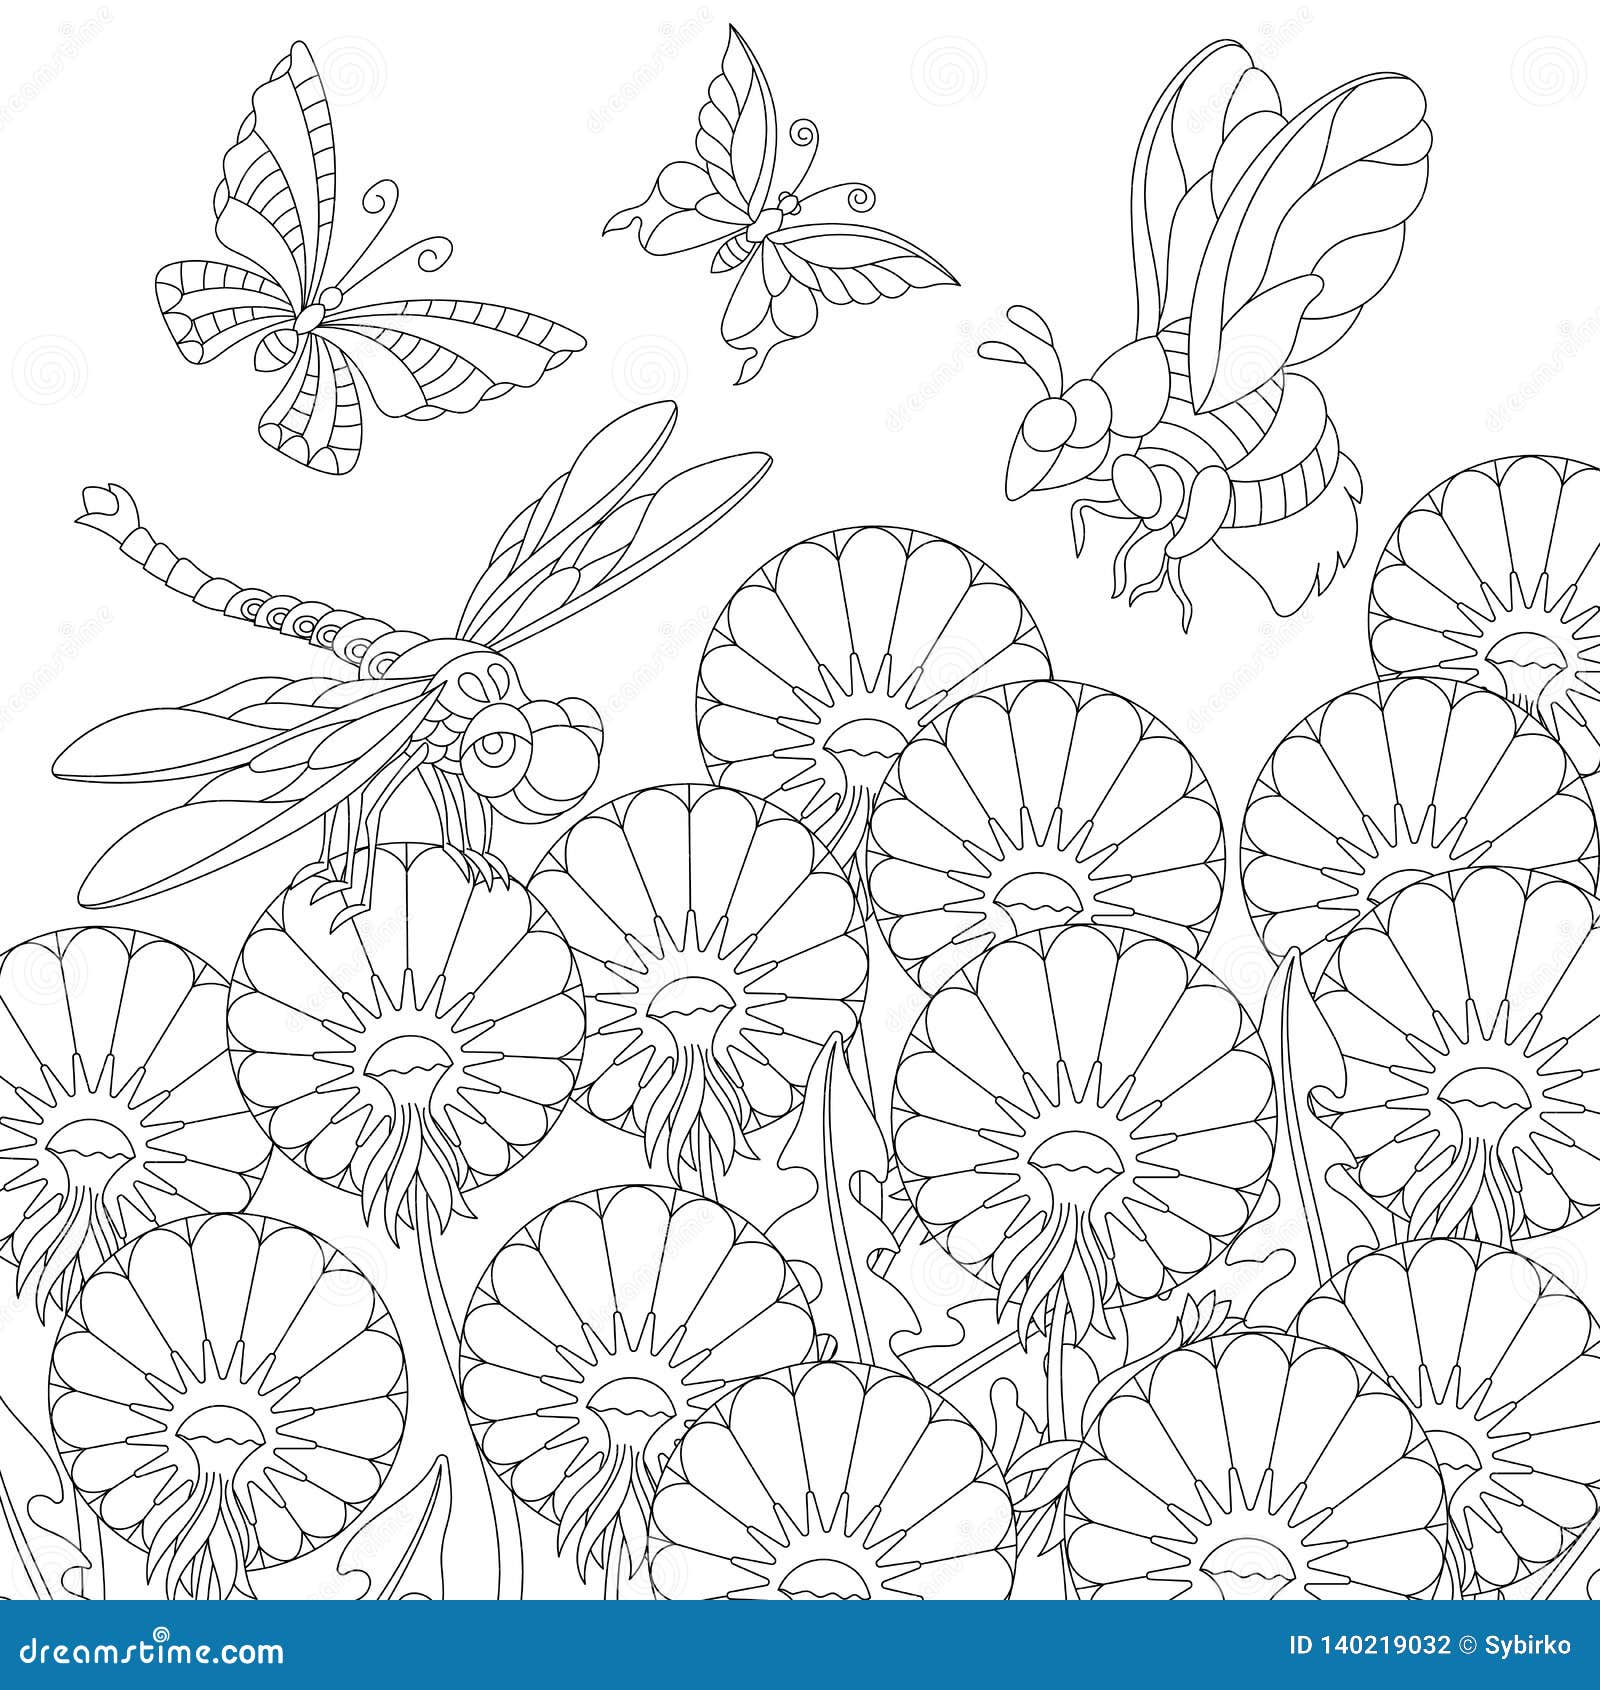 Coloring Page Dragonfly Stock Illustrations – 21 Coloring Page ...